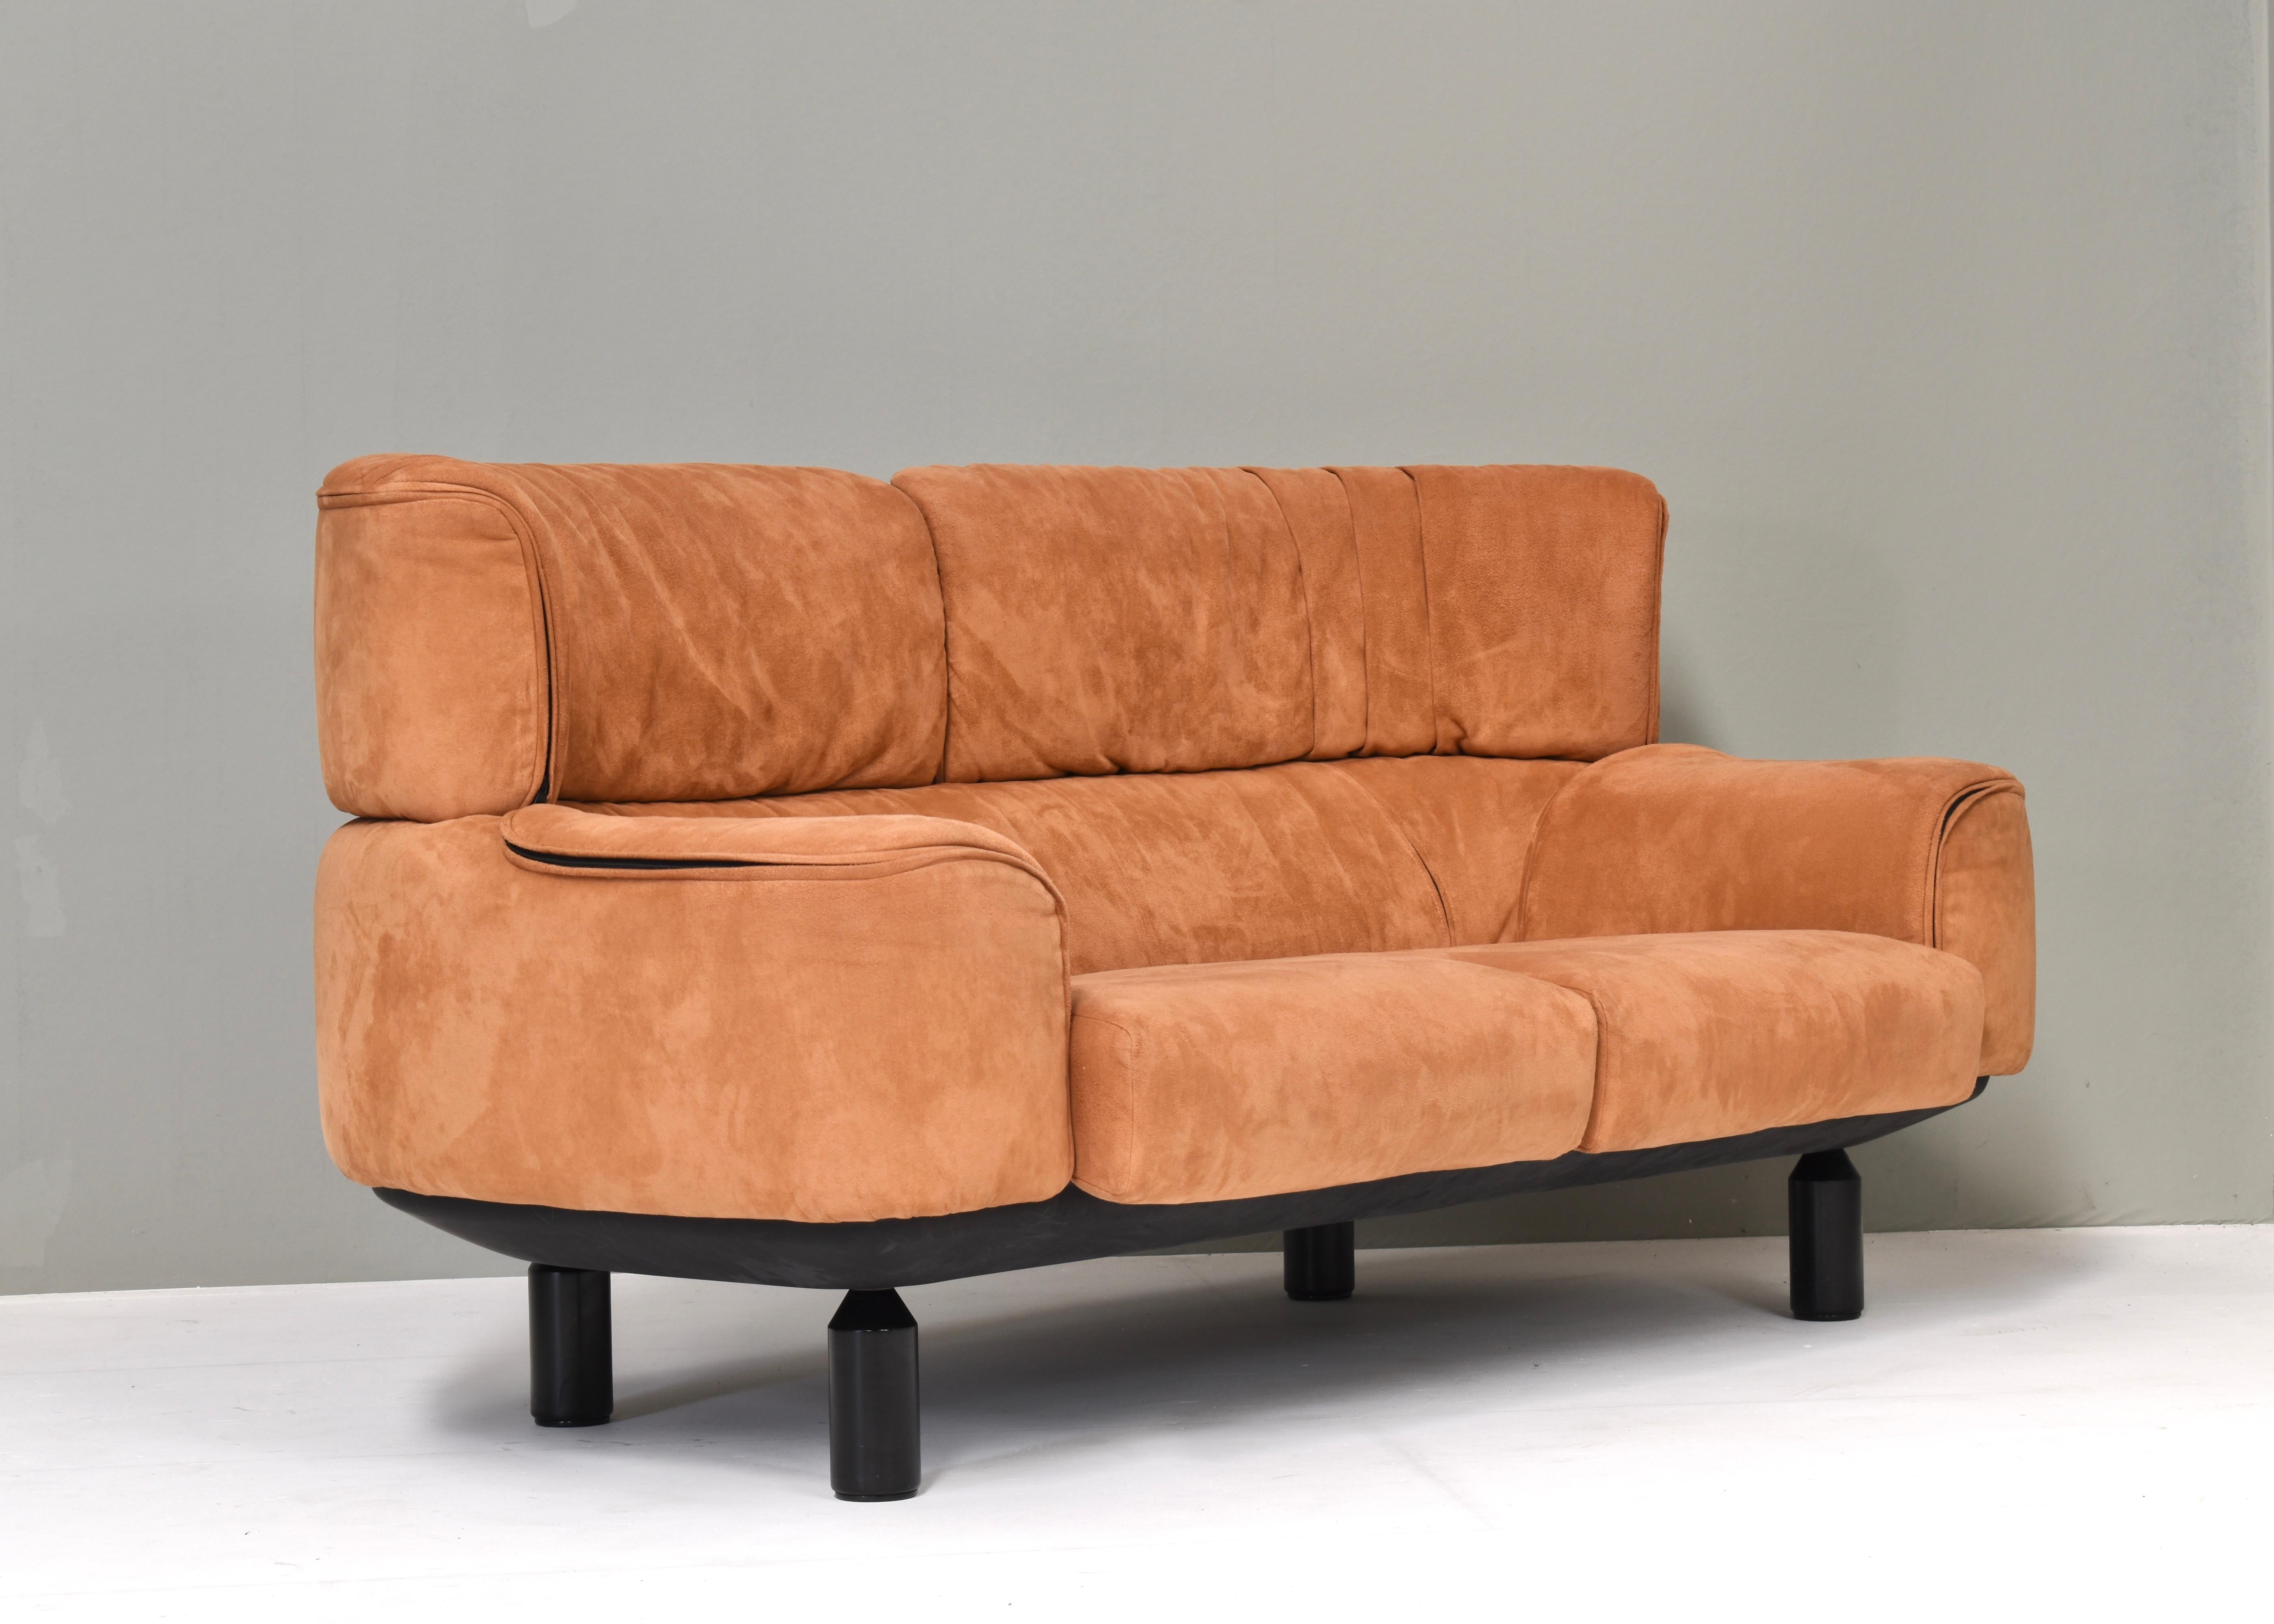 Elegant two-seat loveseat designed by Gianfranco Frattini for Cassina in 1987 and is covered in beautiful terracotta alcantara. The integrated headrests curve around to envelop the sitter. Designed with individually zippered upholstery panels to